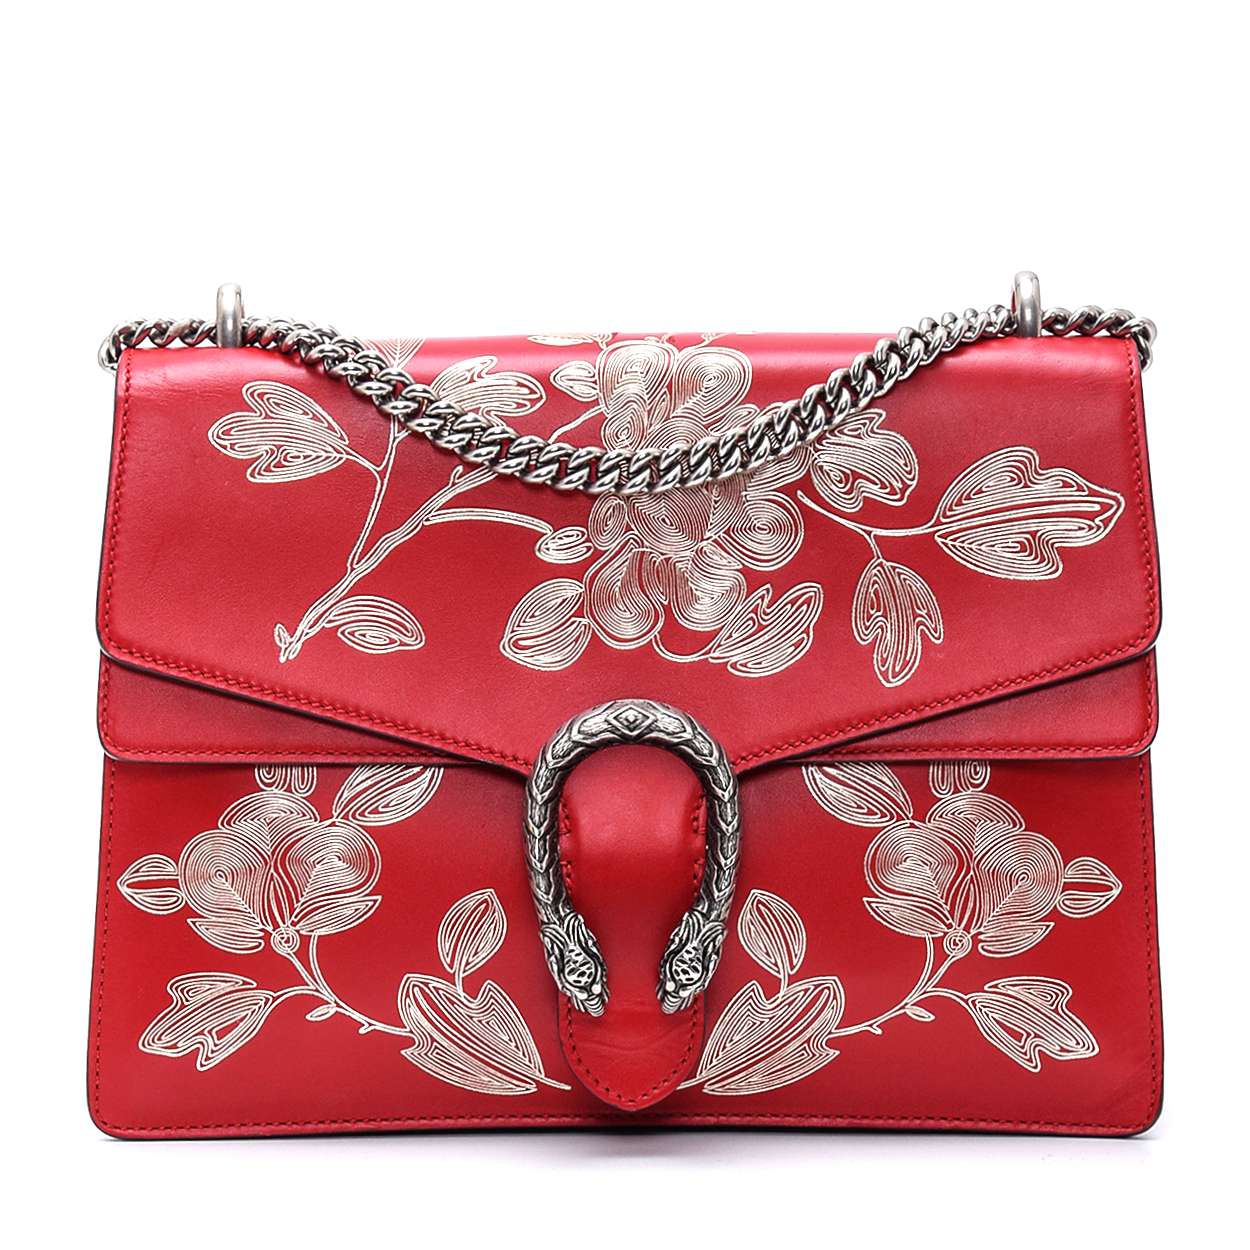 Gucci - Red Calfskin Leather Dionysus Chinese Limited Edition Shoulder Bag